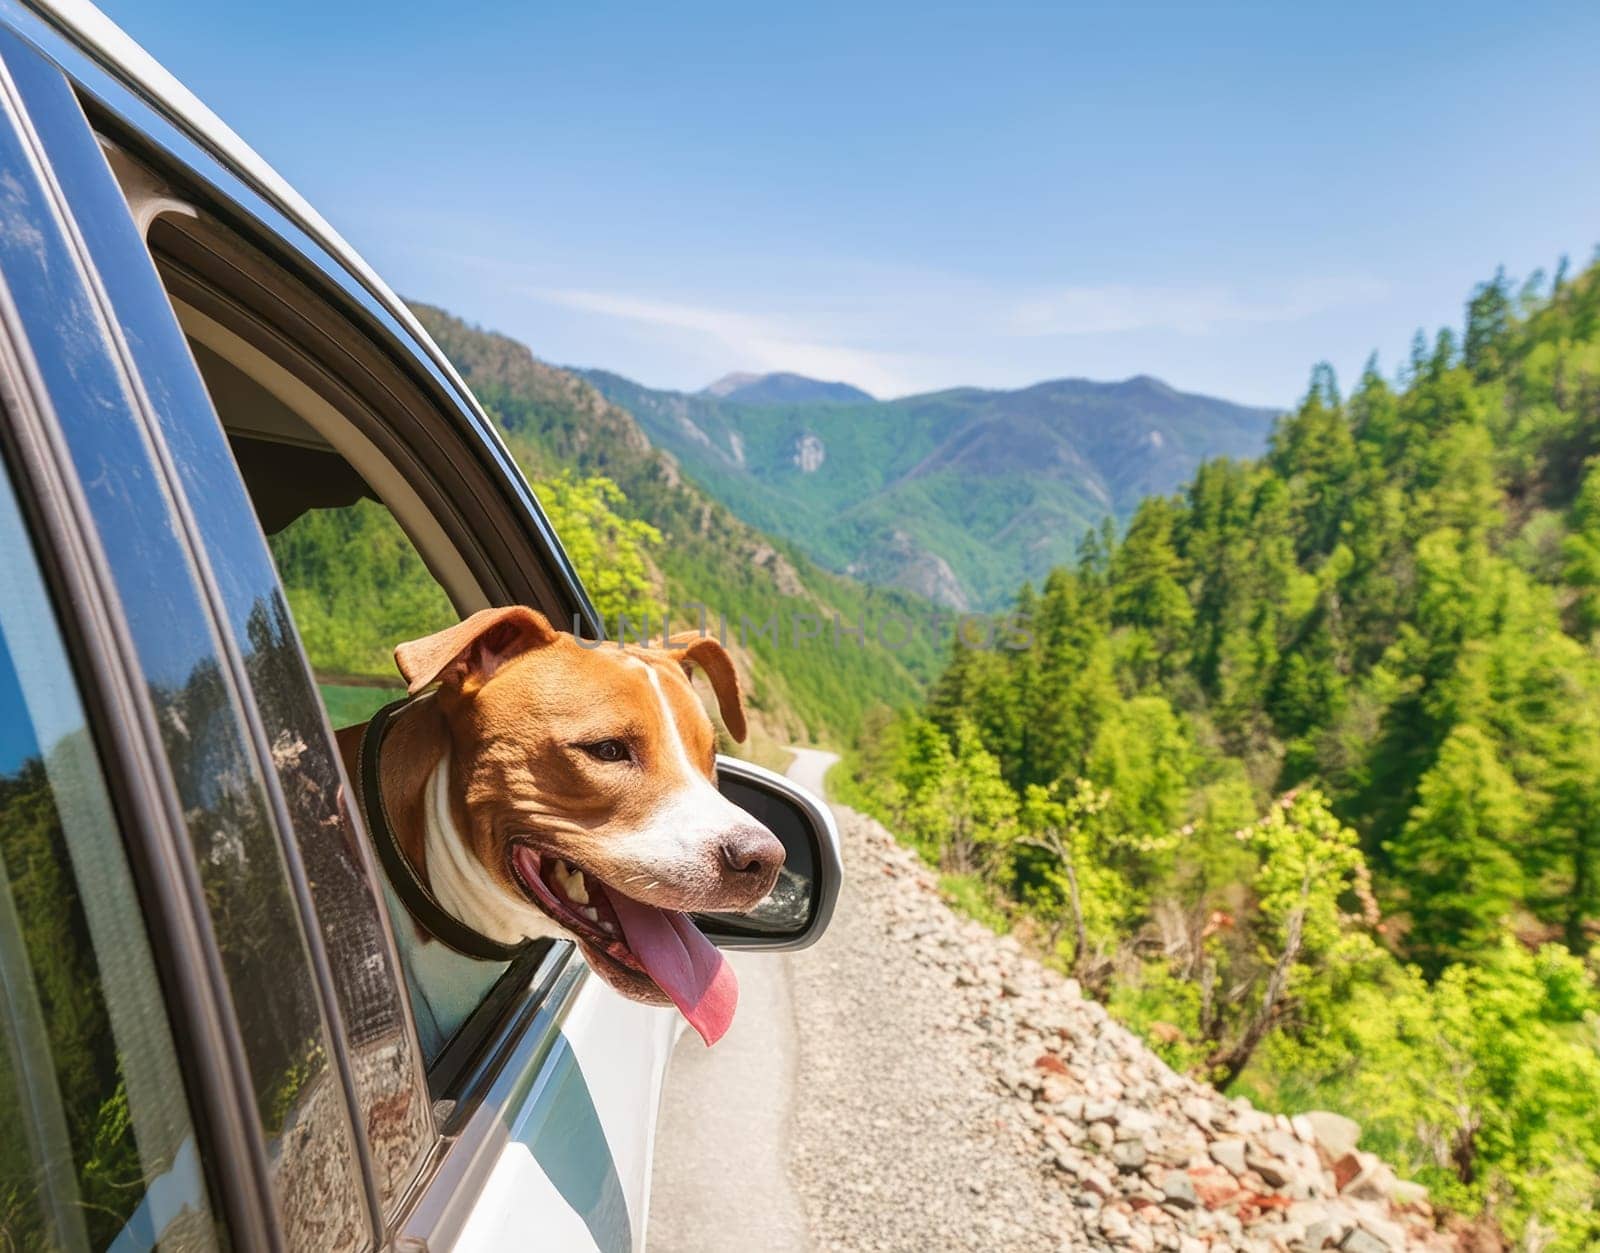 Sunny summer day on an empty mountain road. A happy pitbull dog leans out of the window of a white car. AI generated